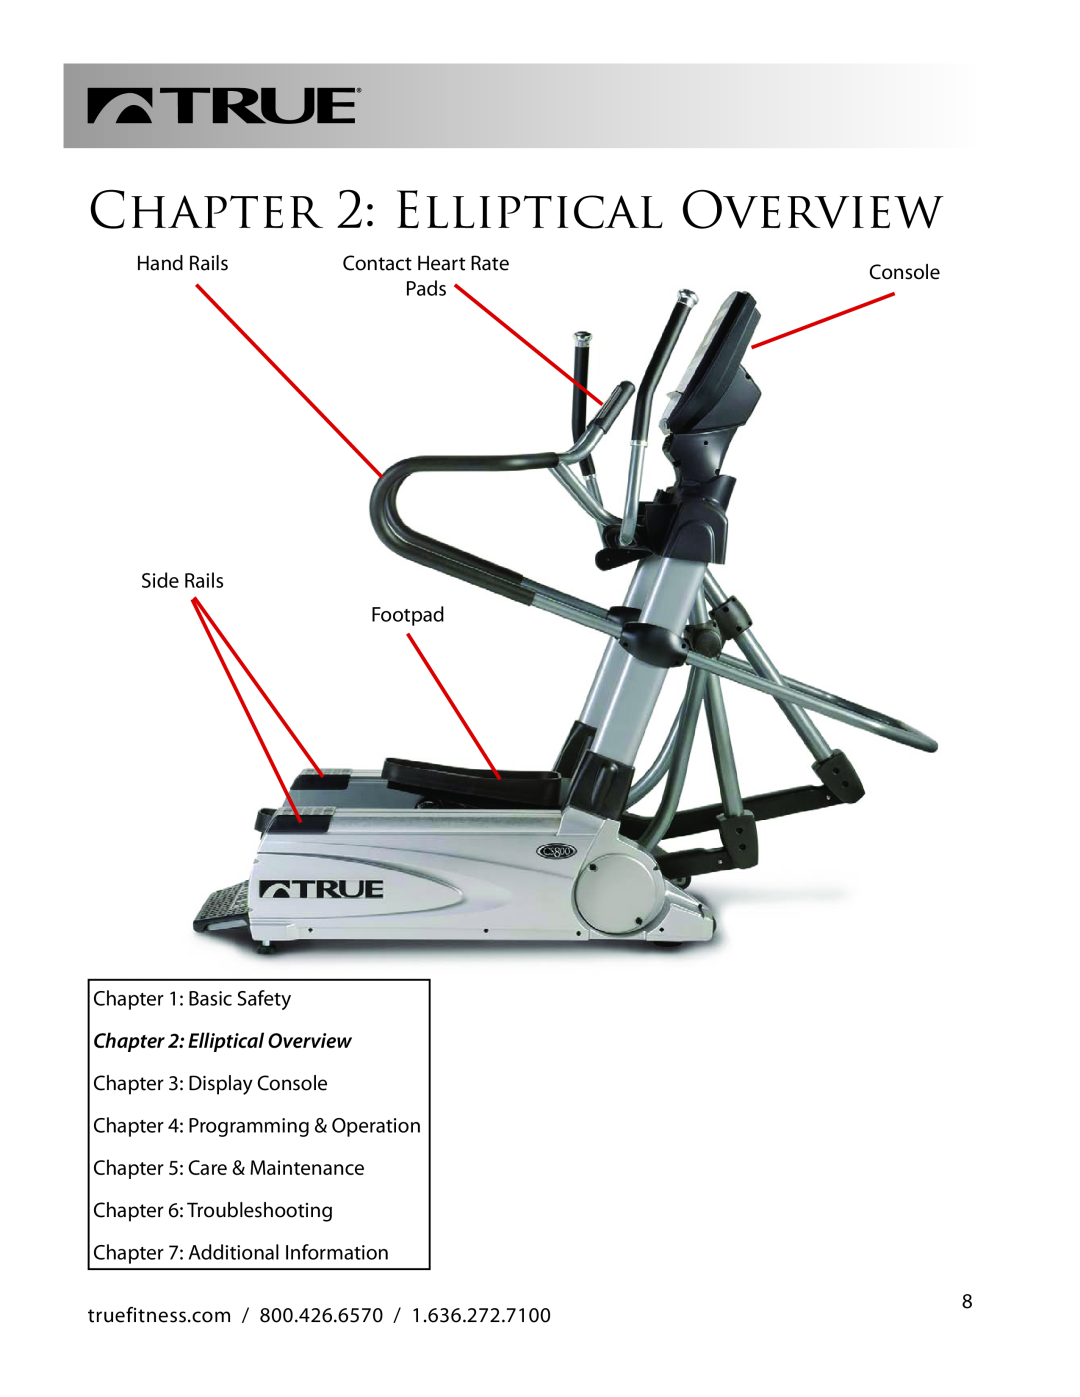 True Fitness CS800 manual Elliptical Overview, Contact Heart Rate, Pads 